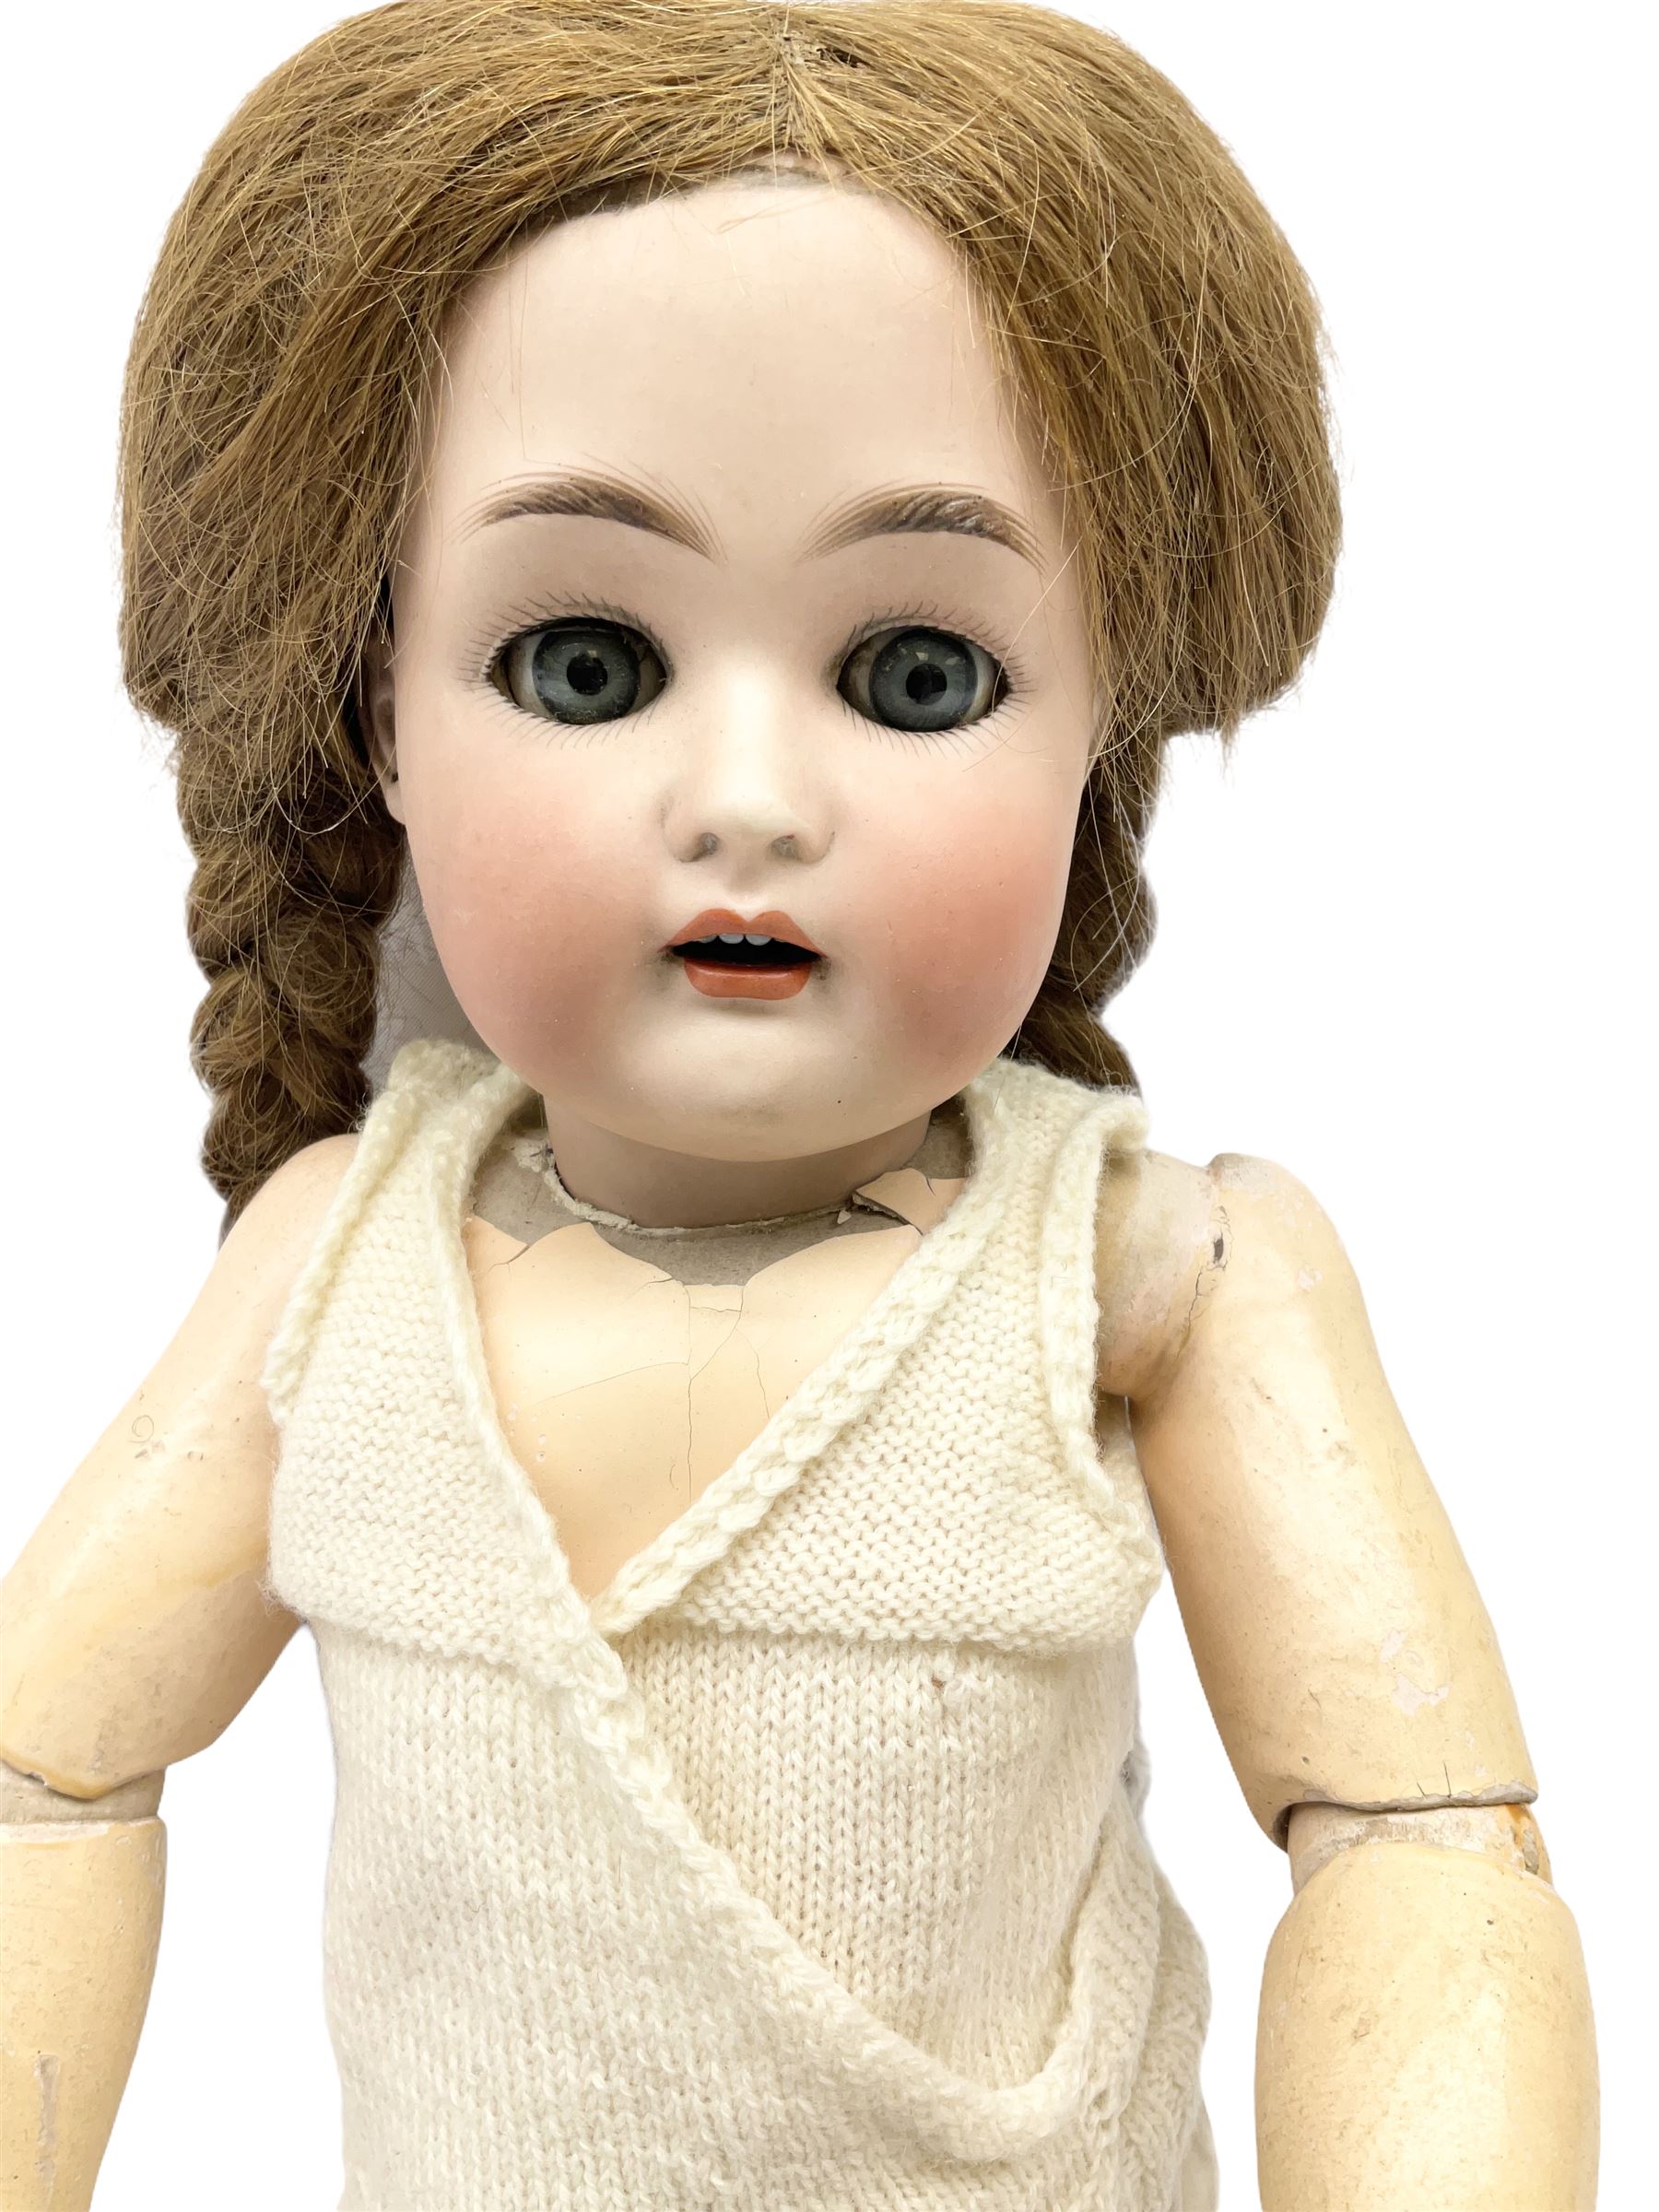 Simon & Halbig for Kammer & Reinhardt bisque head doll with applied hair - Image 7 of 11